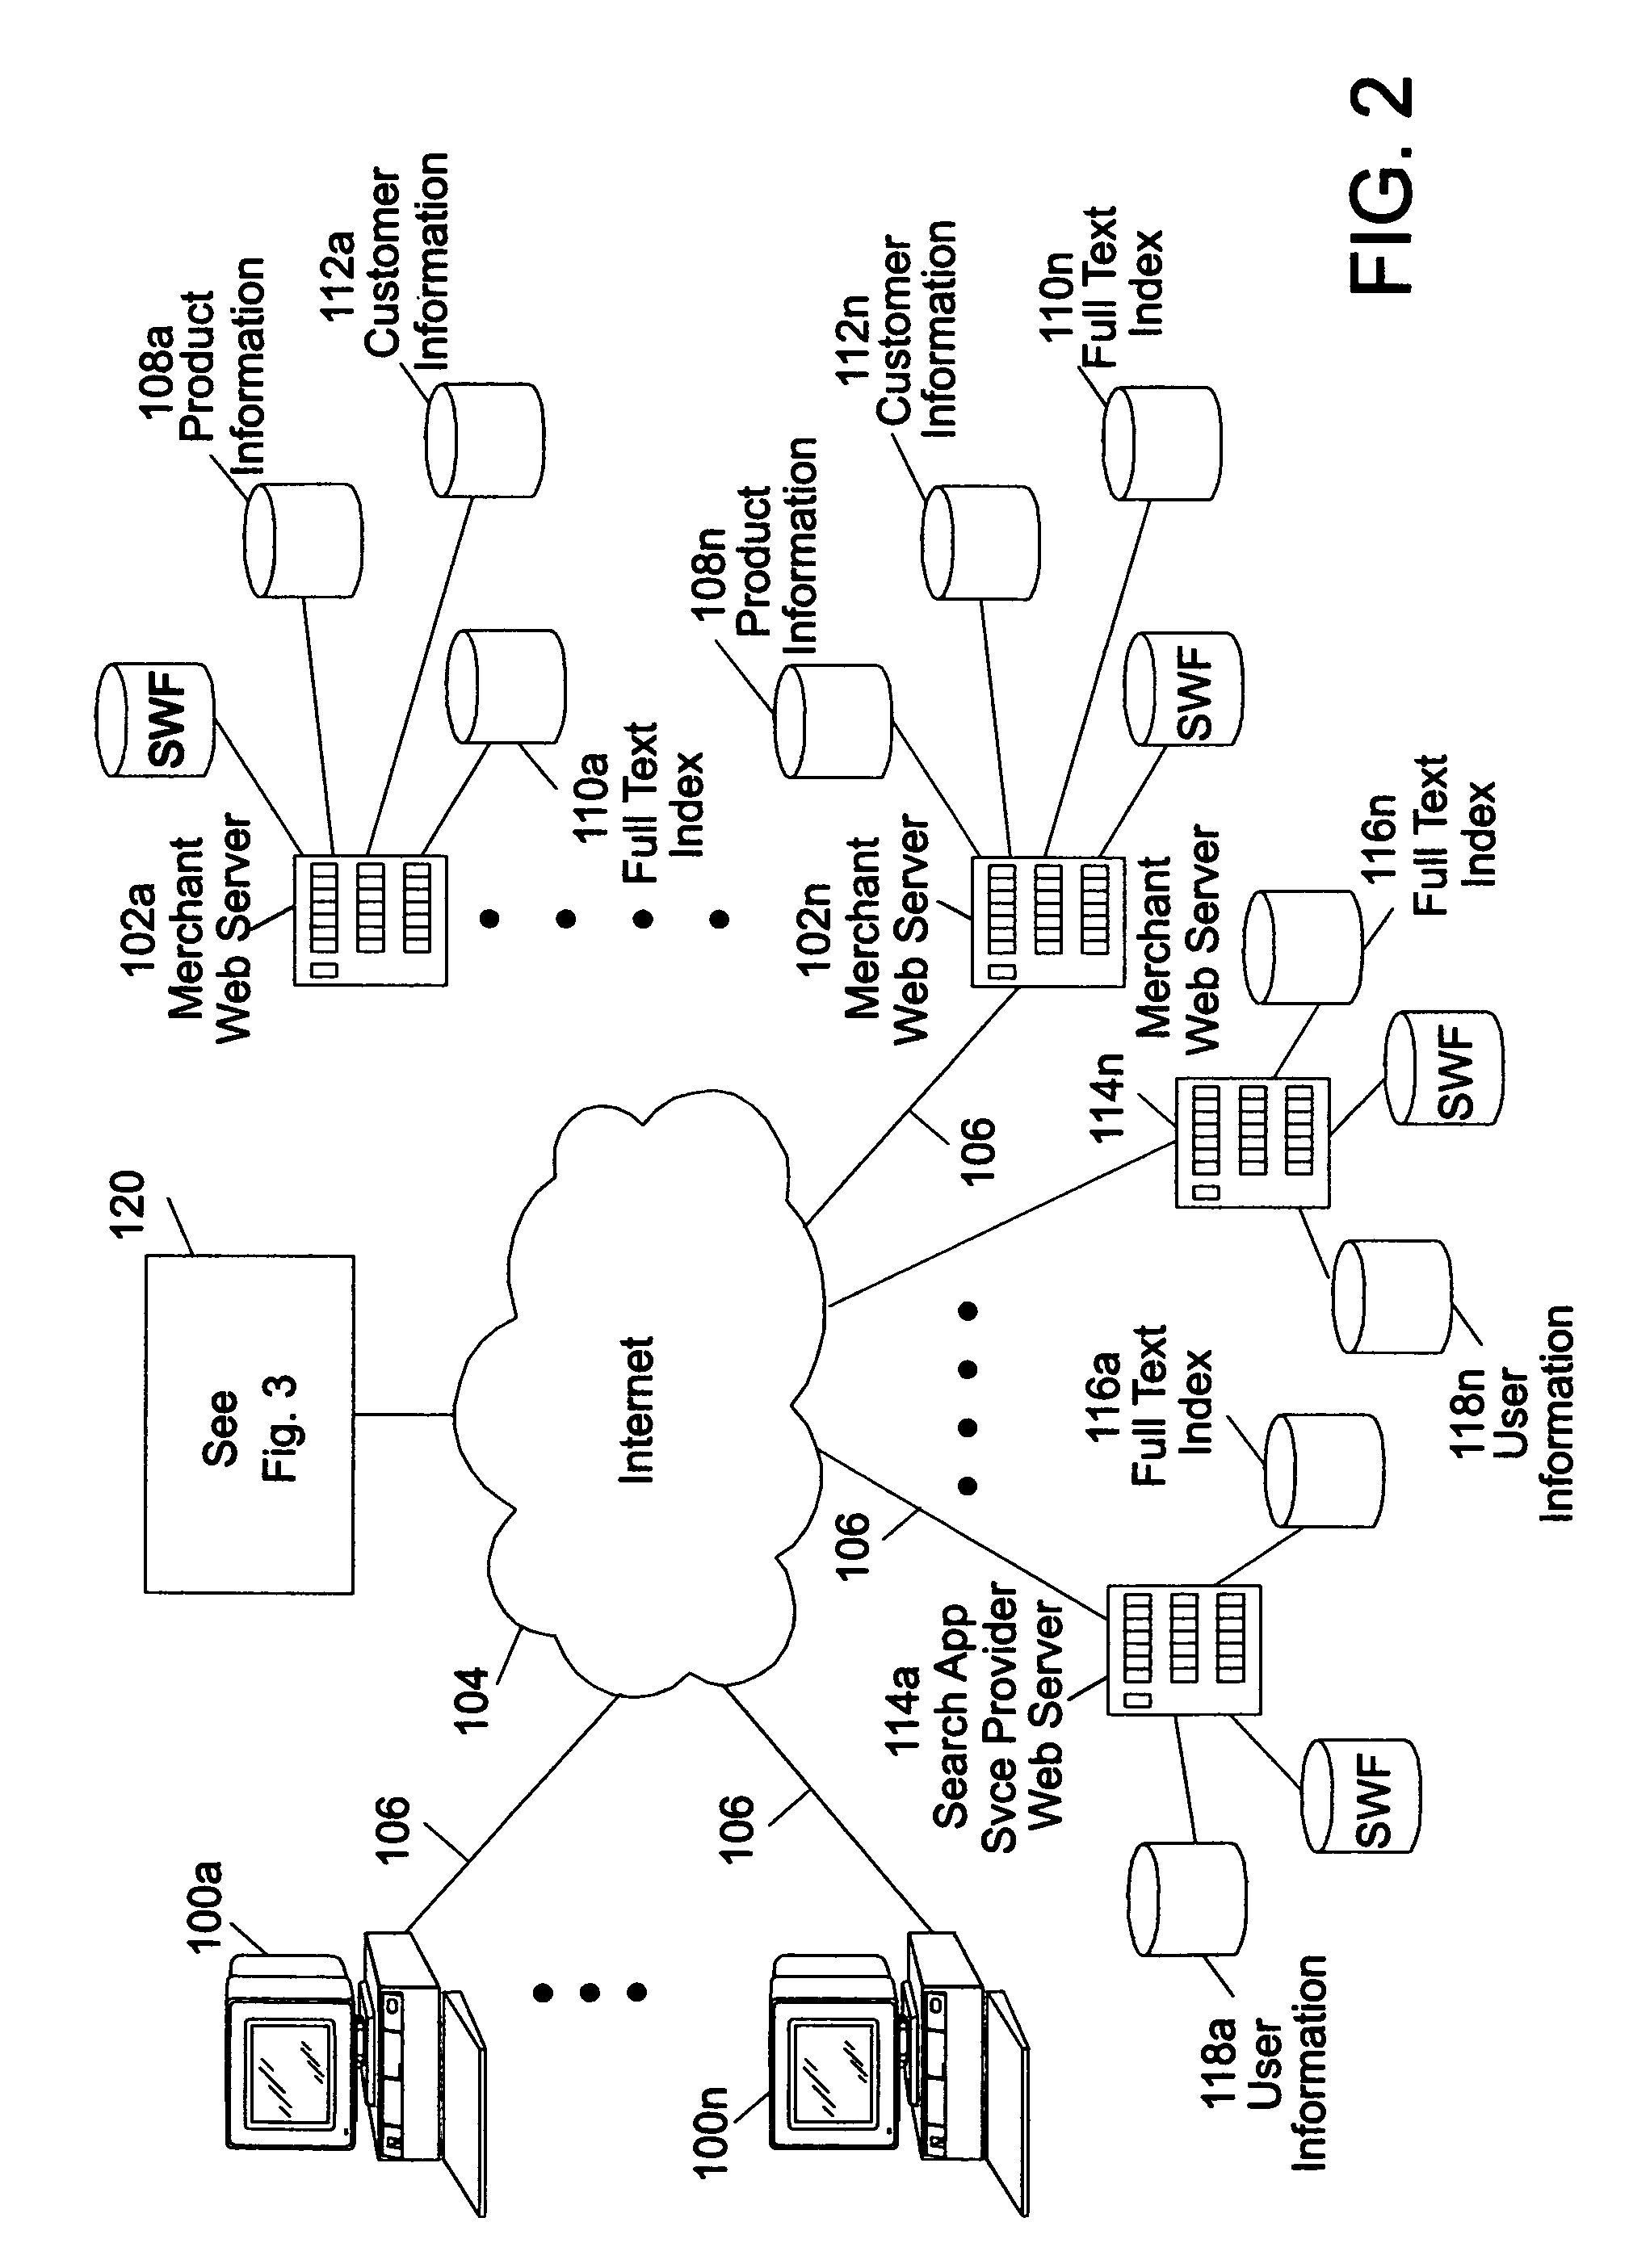 Method of search content enhancement